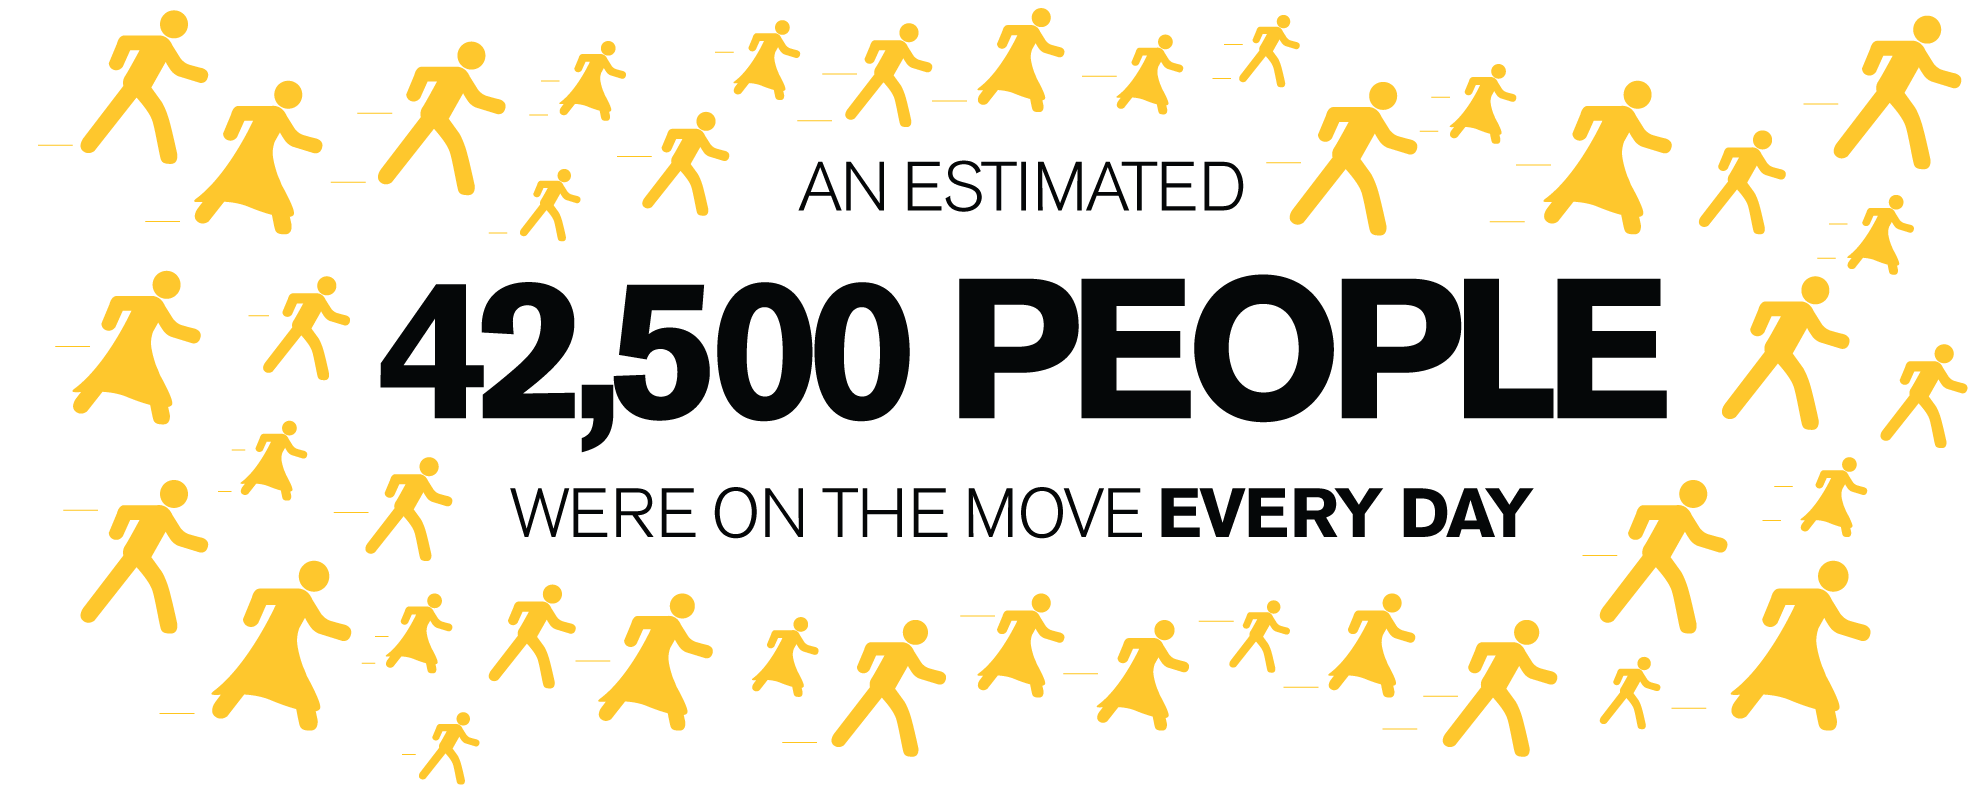 An estimated 42,500 people were on the move every day. Image Courtesy of crisiswatch.webflow.io/.